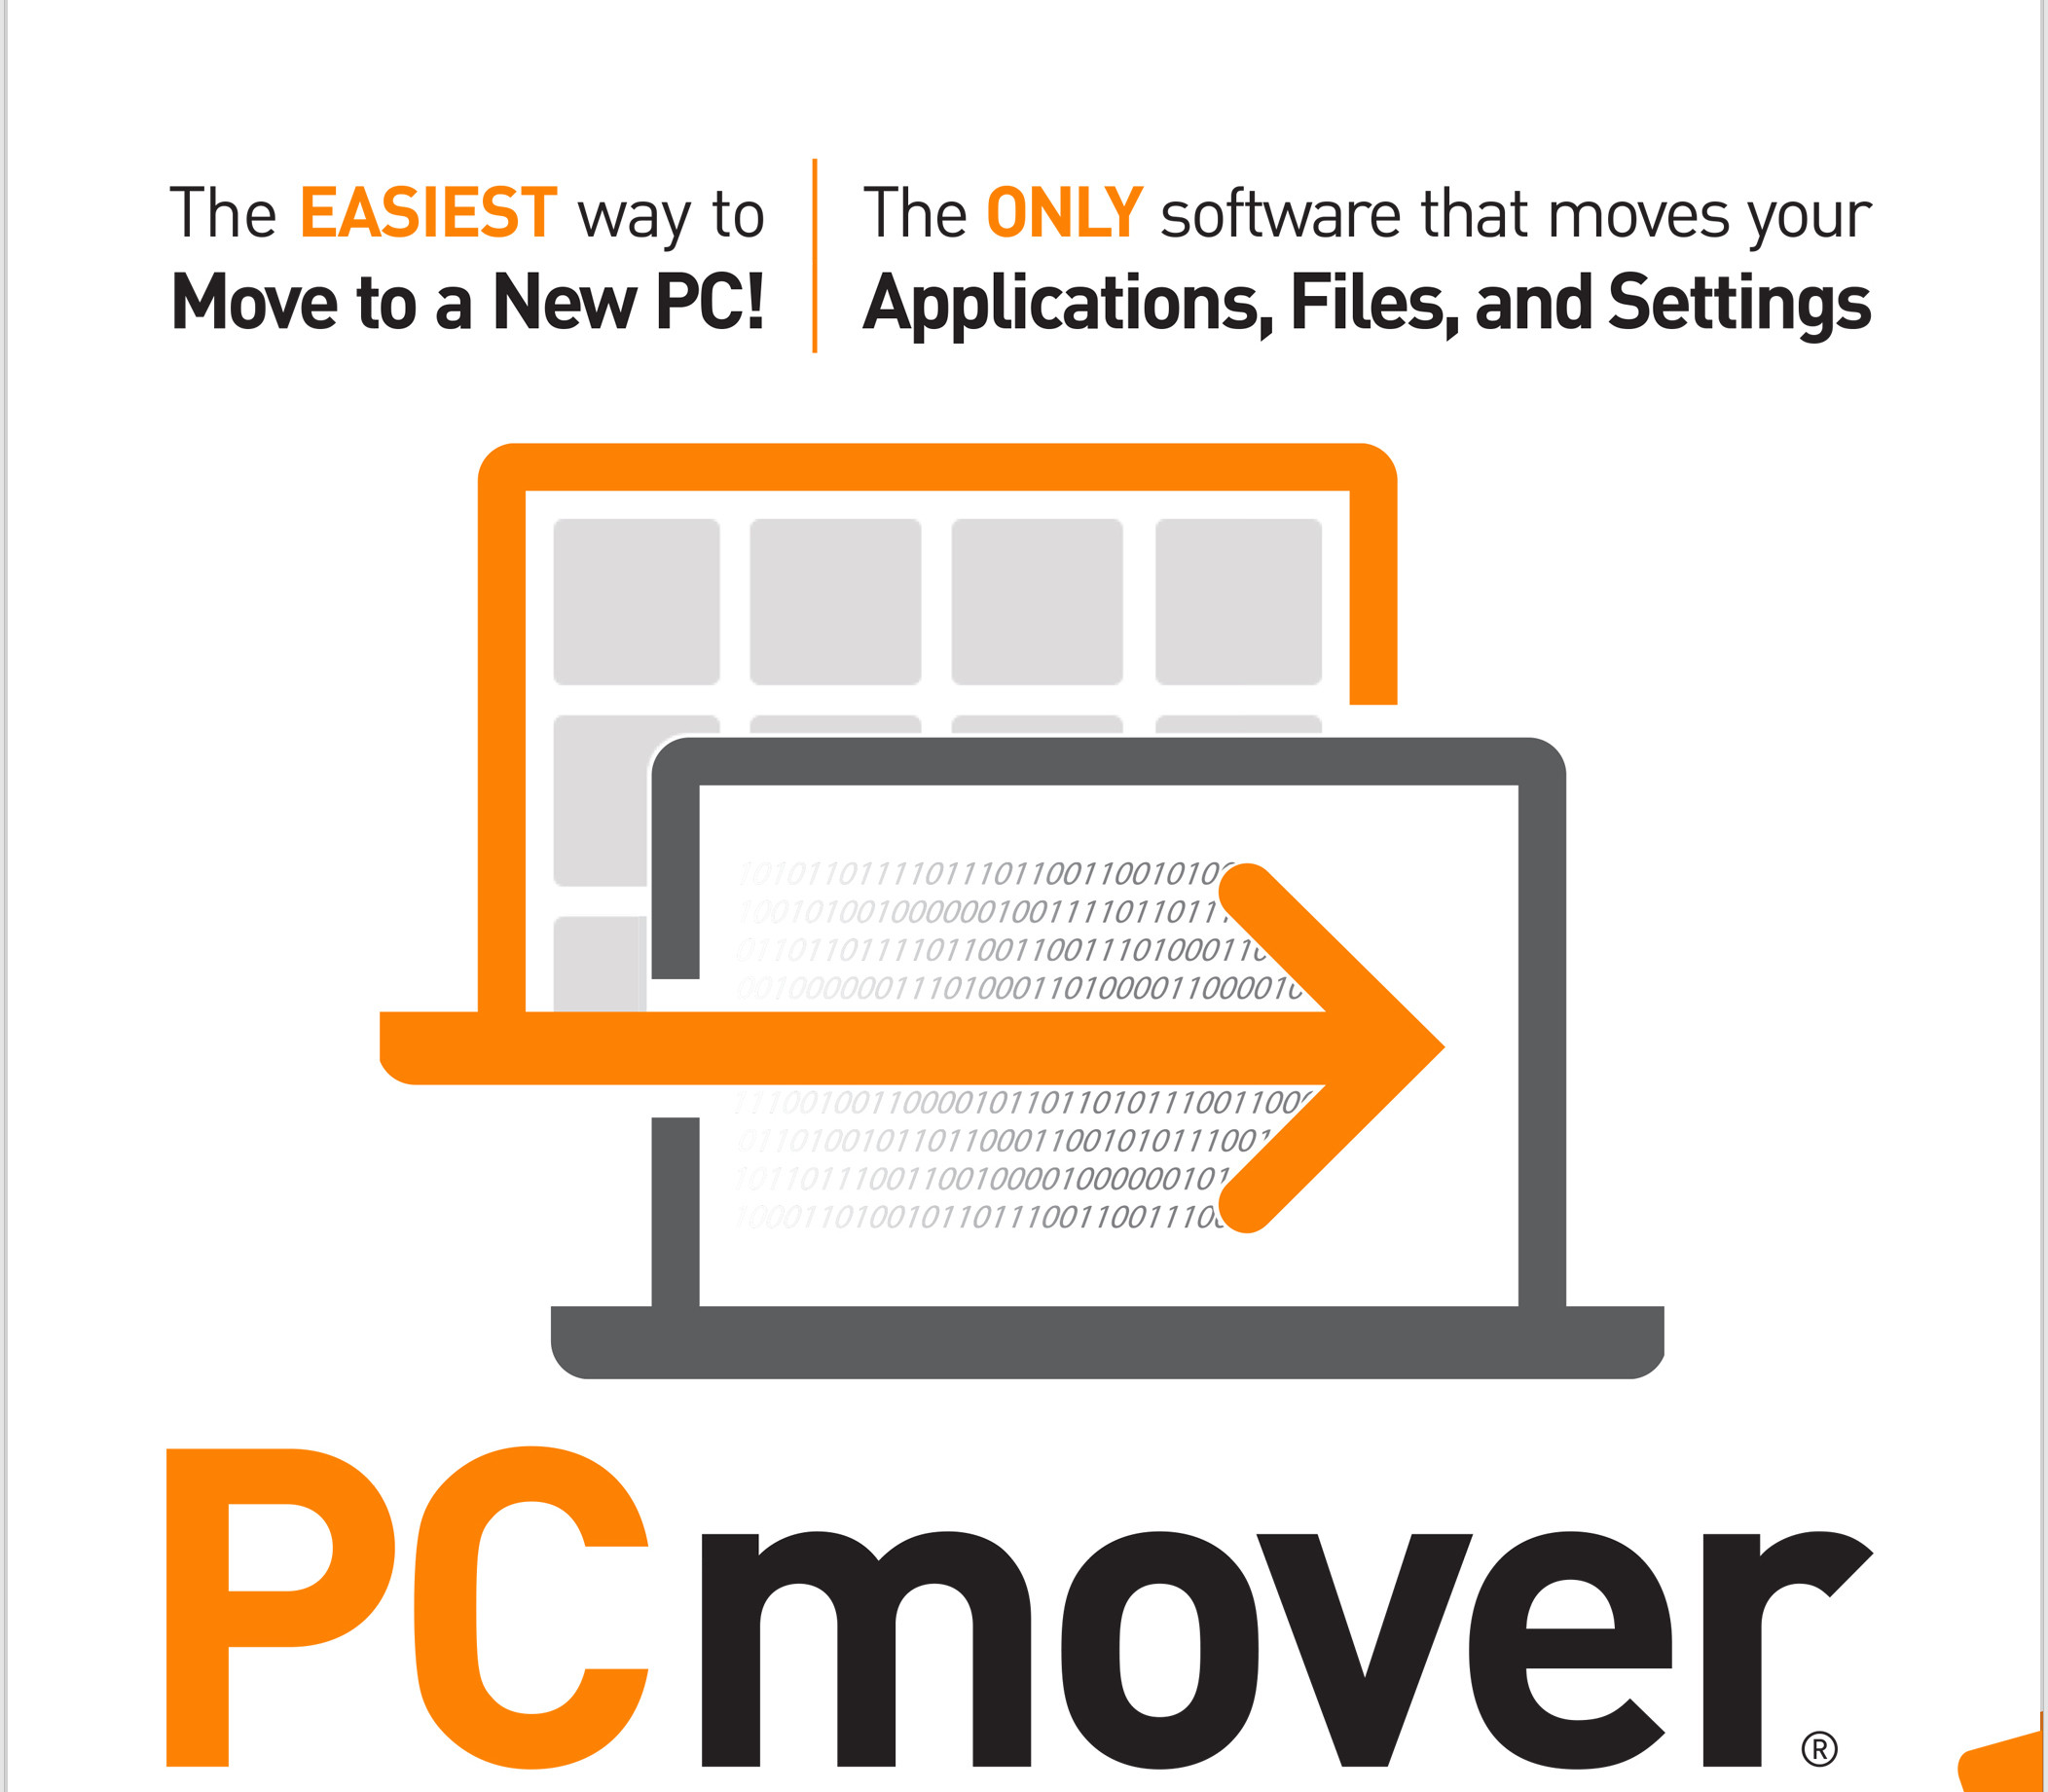 PCmover Professional Key (1 Use / 1 PC)